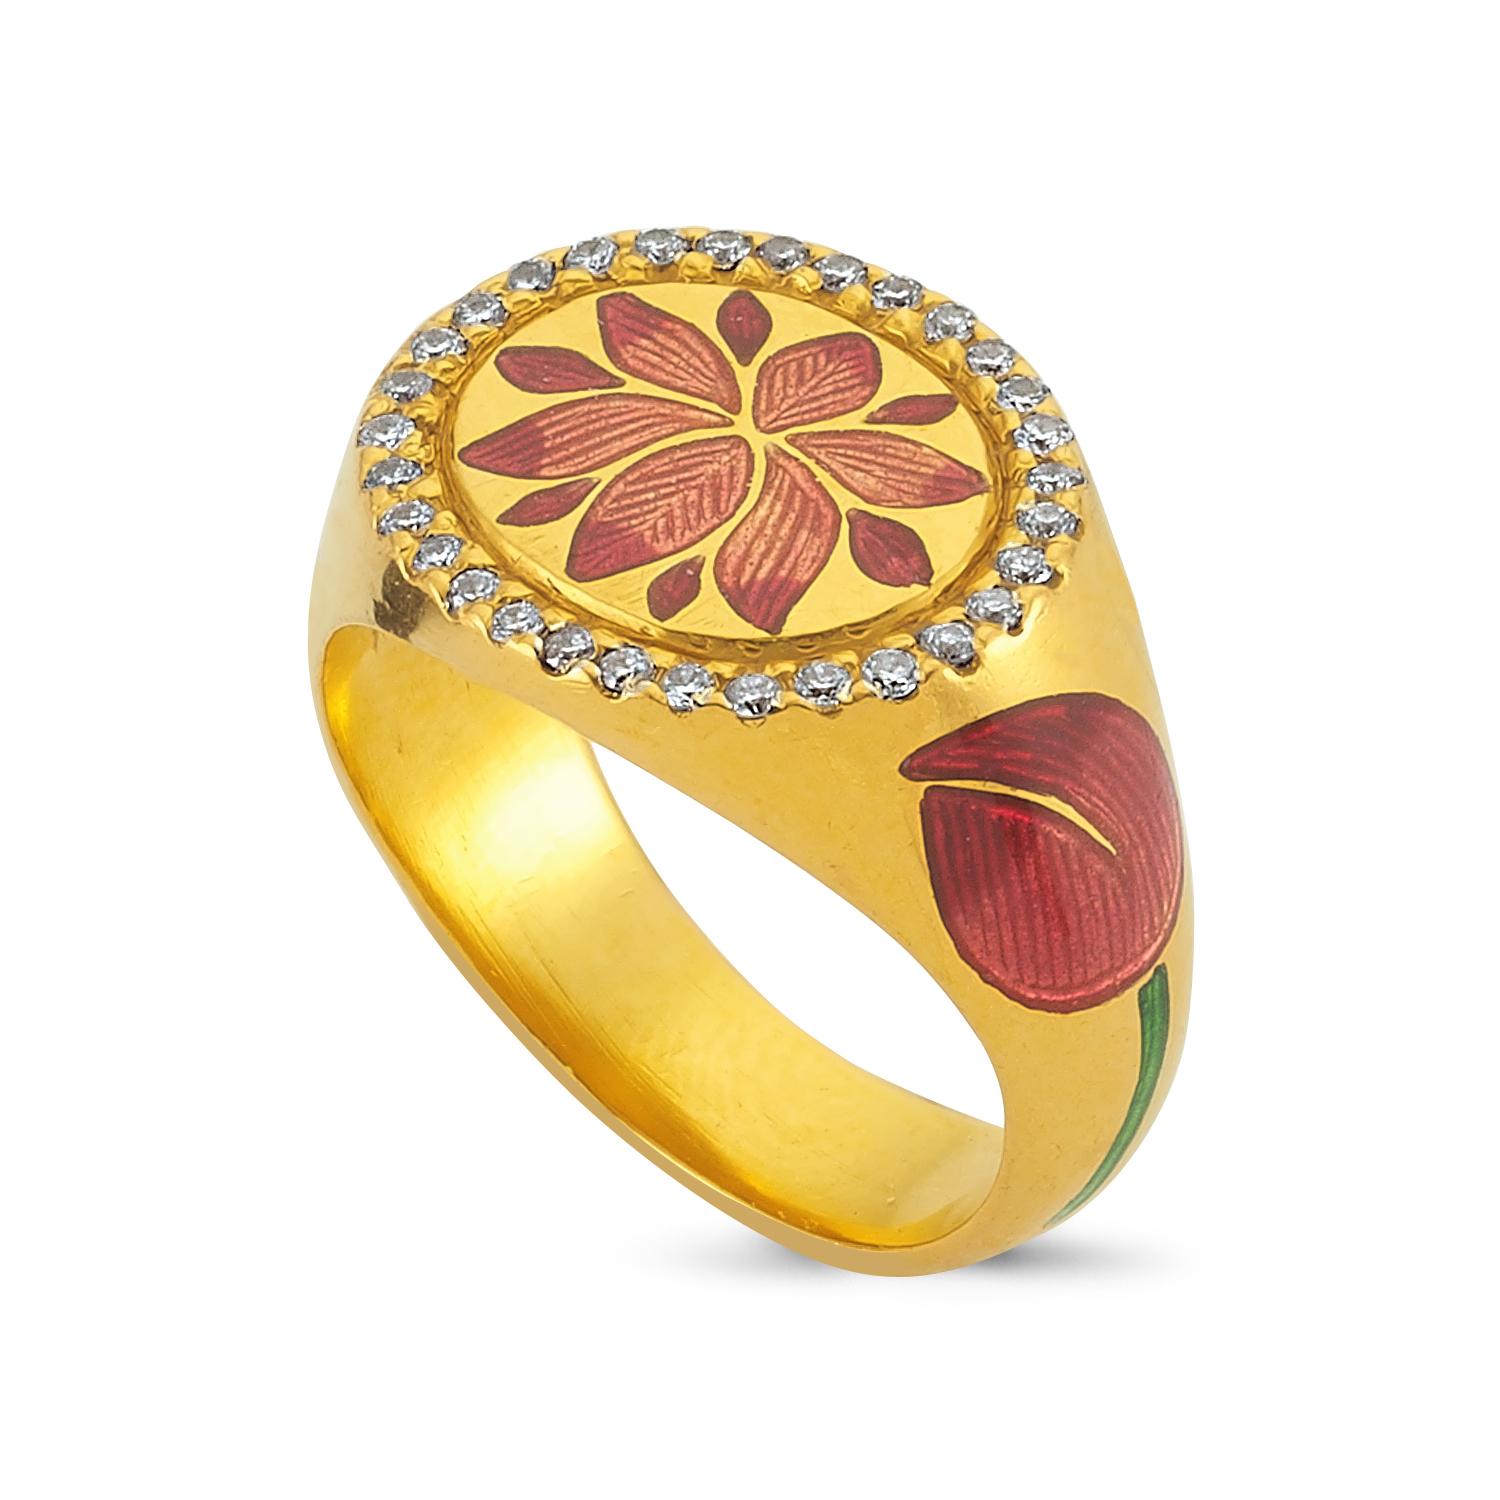 Kamala Ring with 31 Diamonds and Jaipur Enamel Lotus Motif, 22 Karat Yellow Gold In New Condition For Sale In Kew, Victoria